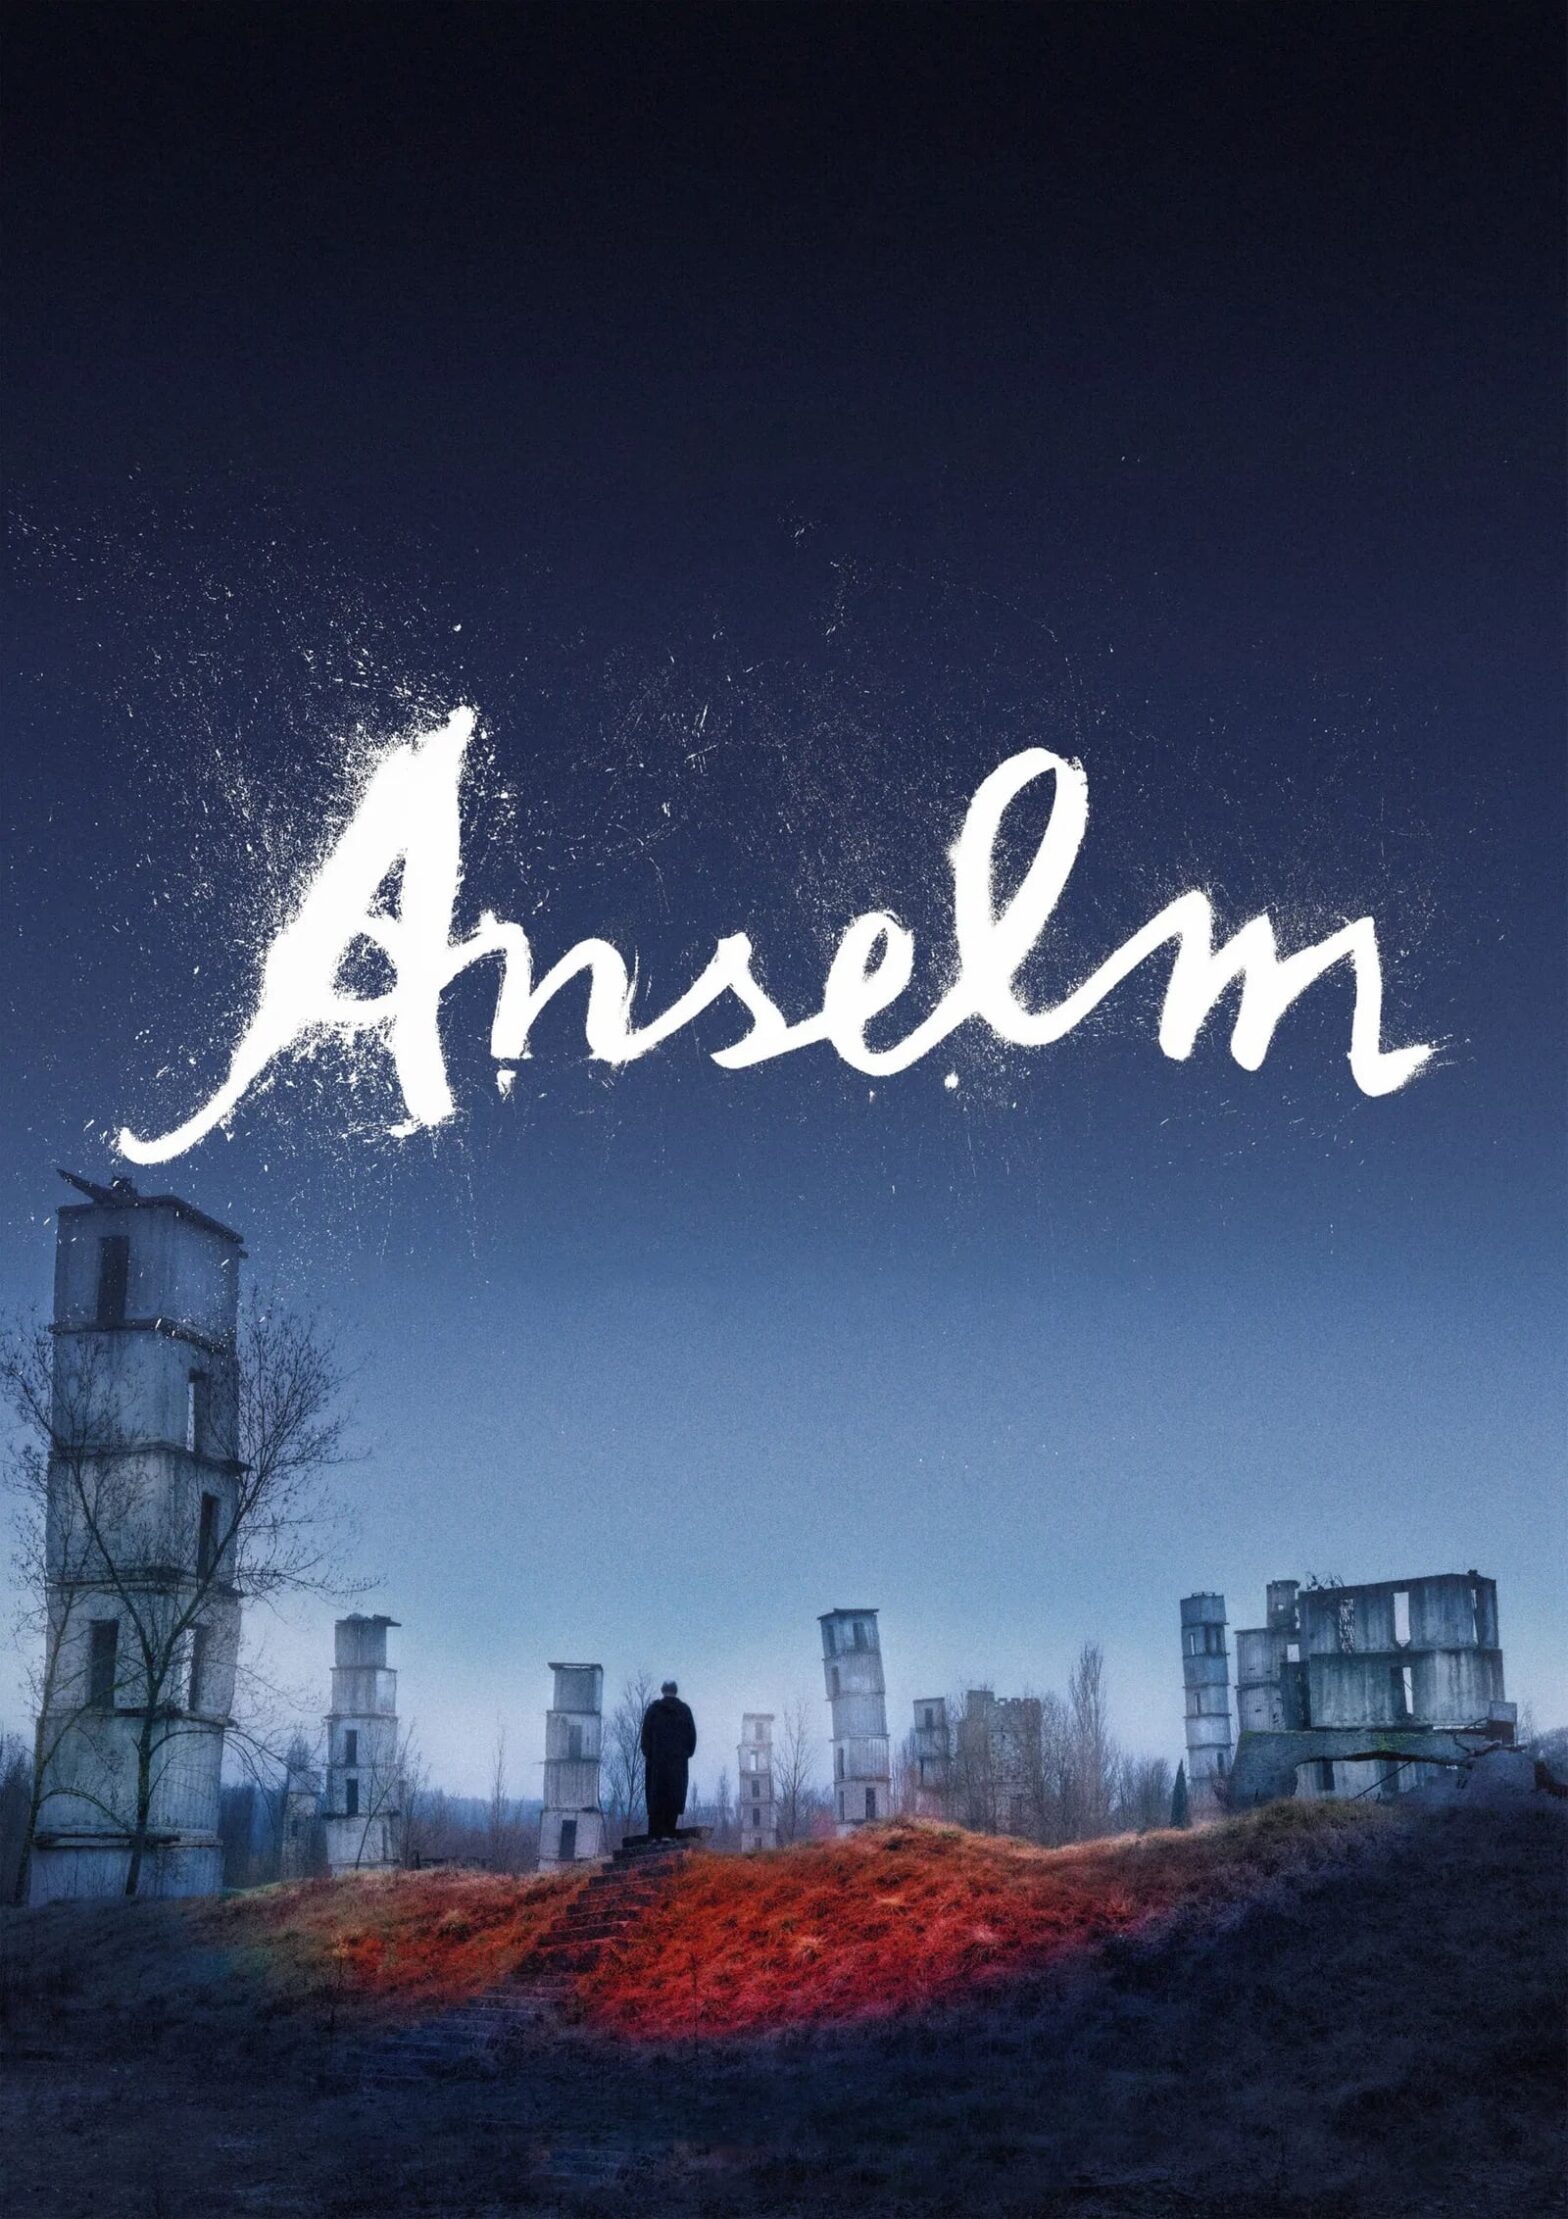 Poster for the movie "Anselm"